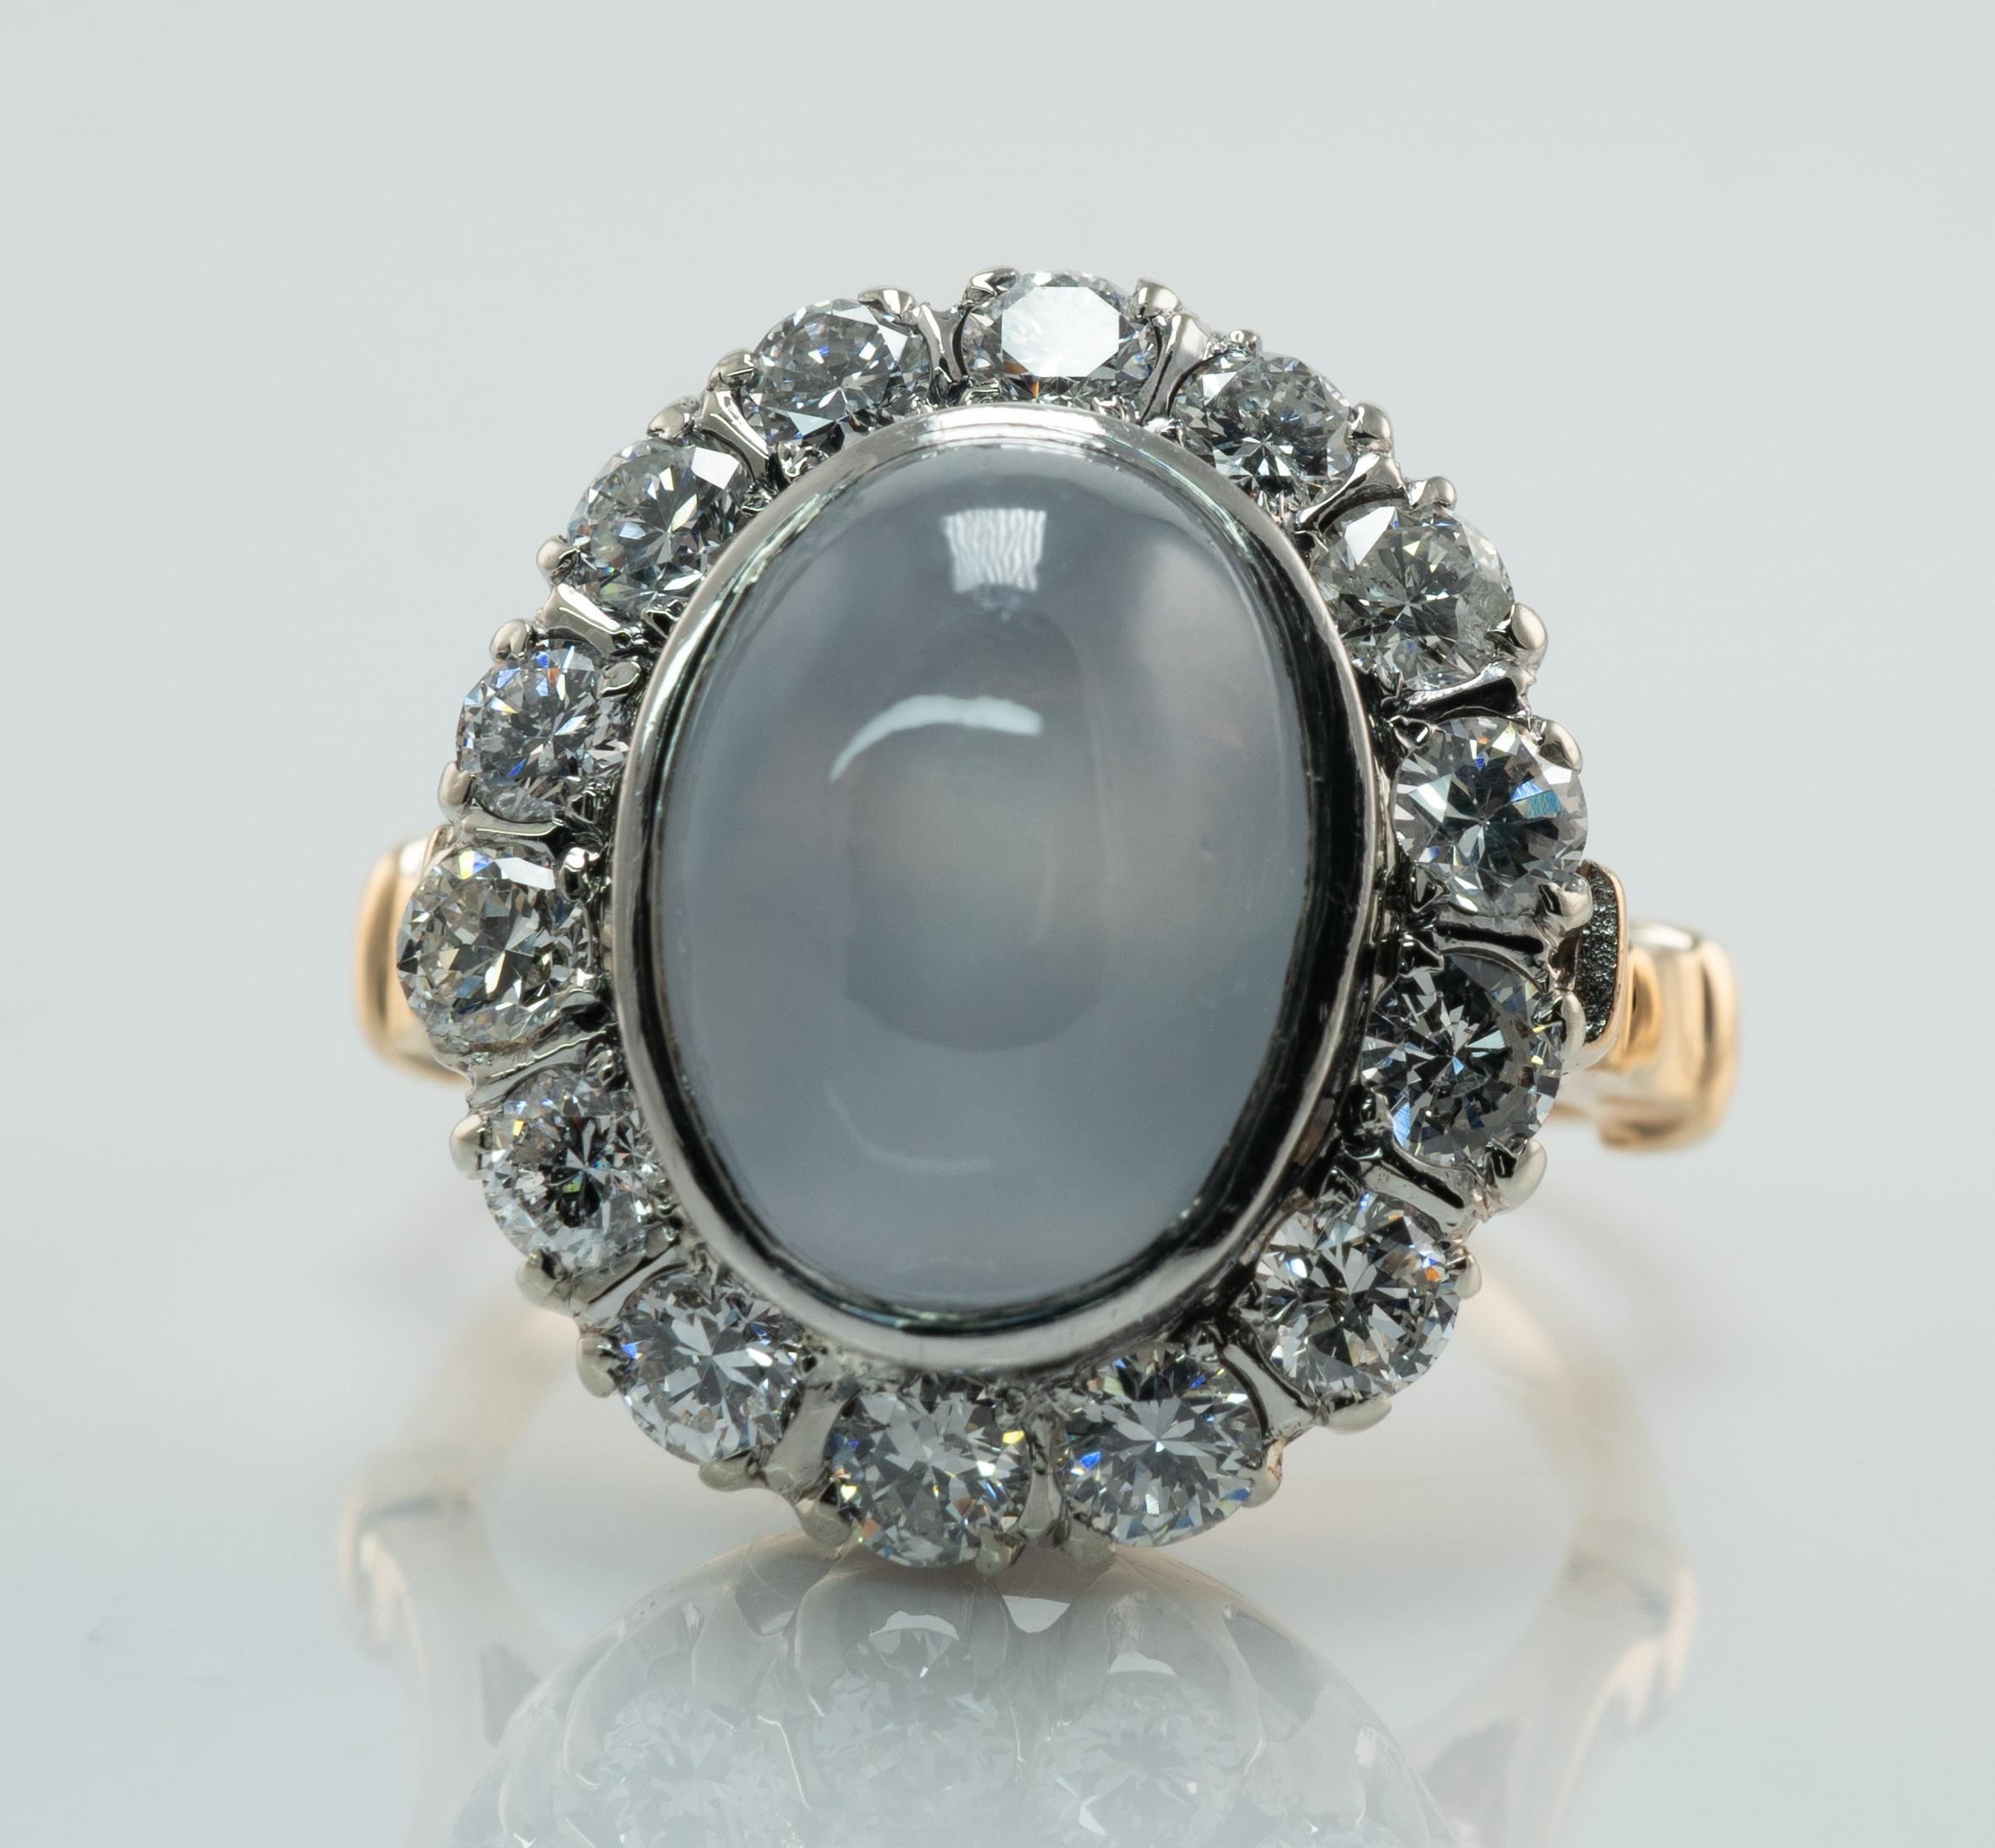 Natural Cabochon Star Sapphire Diamond Ring 14K Yellow Gold Vintage

This vintage ring is crafted in solid 14K Yellow Gold.
The center natural Earth mined Sapphire cabochon measures 12mm x 09mm (about 5.00 carats).
The gem has minor blemish on the